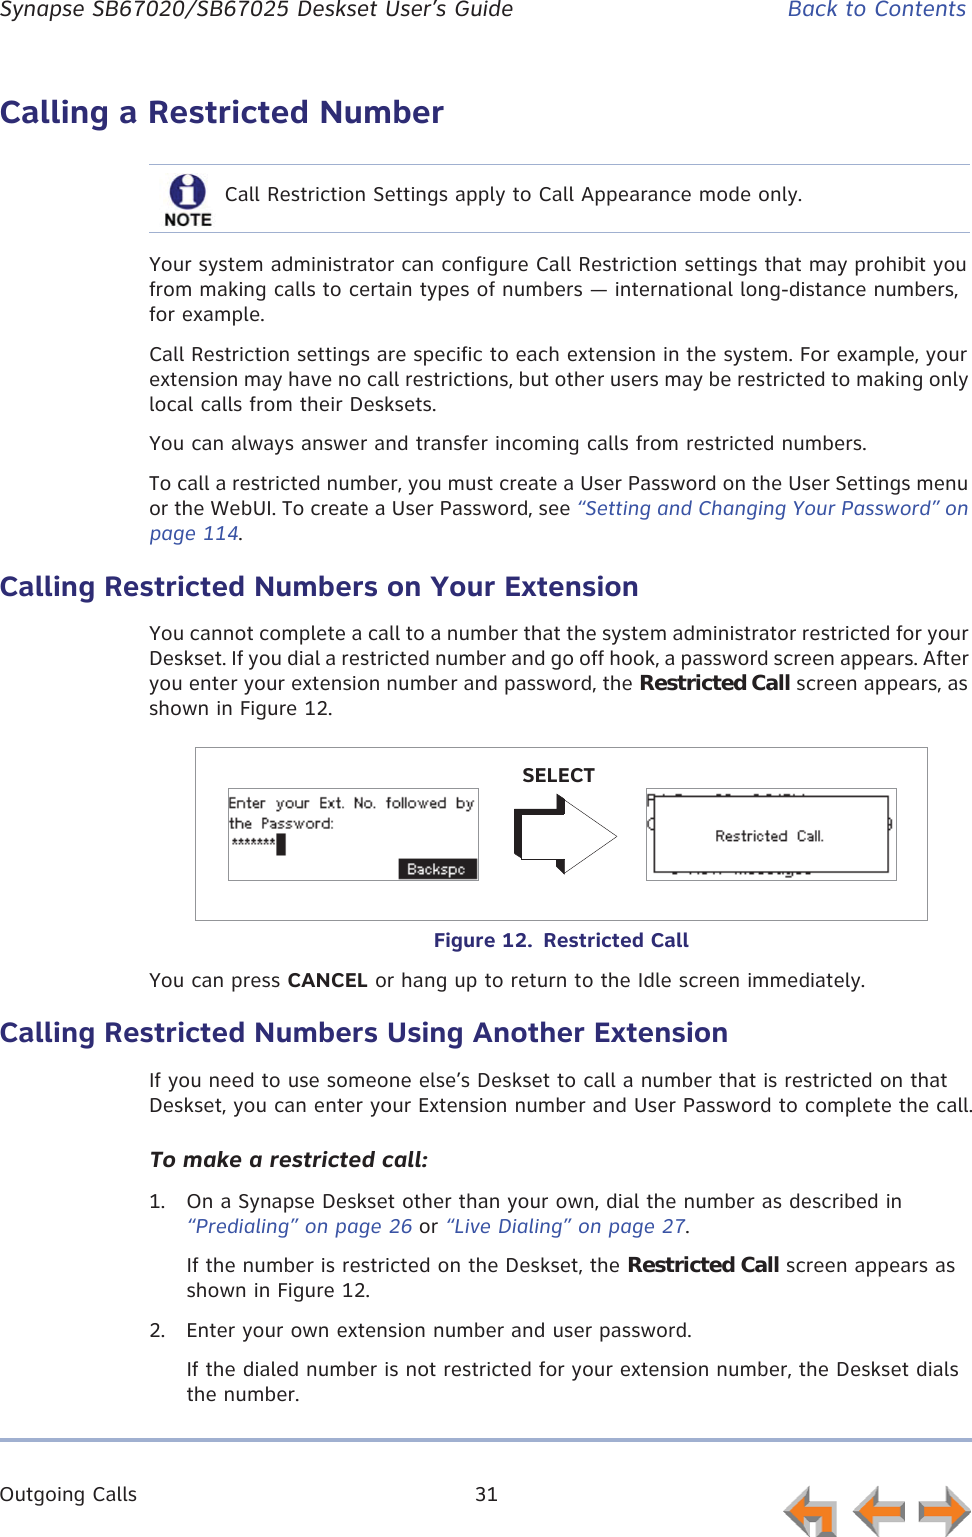 Outgoing Calls 31      Synapse SB67020/SB67025 Deskset User’s Guide Back to ContentsCalling a Restricted NumberYour system administrator can configure Call Restriction settings that may prohibit you from making calls to certain types of numbers — international long-distance numbers, for example.Call Restriction settings are specific to each extension in the system. For example, your extension may have no call restrictions, but other users may be restricted to making only local calls from their Desksets.You can always answer and transfer incoming calls from restricted numbers.To call a restricted number, you must create a User Password on the User Settings menu or the WebUI. To create a User Password, see “Setting and Changing Your Password” on page 114.Calling Restricted Numbers on Your ExtensionYou cannot complete a call to a number that the system administrator restricted for your Deskset. If you dial a restricted number and go off hook, a password screen appears. After you enter your extension number and password, the Restricted Call screen appears, as shown in Figure 12.Figure 12.  Restricted CallYou can press CANCEL or hang up to return to the Idle screen immediately.Calling Restricted Numbers Using Another ExtensionIf you need to use someone else’s Deskset to call a number that is restricted on that Deskset, you can enter your Extension number and User Password to complete the call.To make a restricted call:1. On a Synapse Deskset other than your own, dial the number as described in “Predialing” on page 26 or “Live Dialing” on page 27.If the number is restricted on the Deskset, the Restricted Call screen appears as shown in Figure 12.2. Enter your own extension number and user password.If the dialed number is not restricted for your extension number, the Deskset dials the number.Call Restriction Settings apply to Call Appearance mode only.SELECT